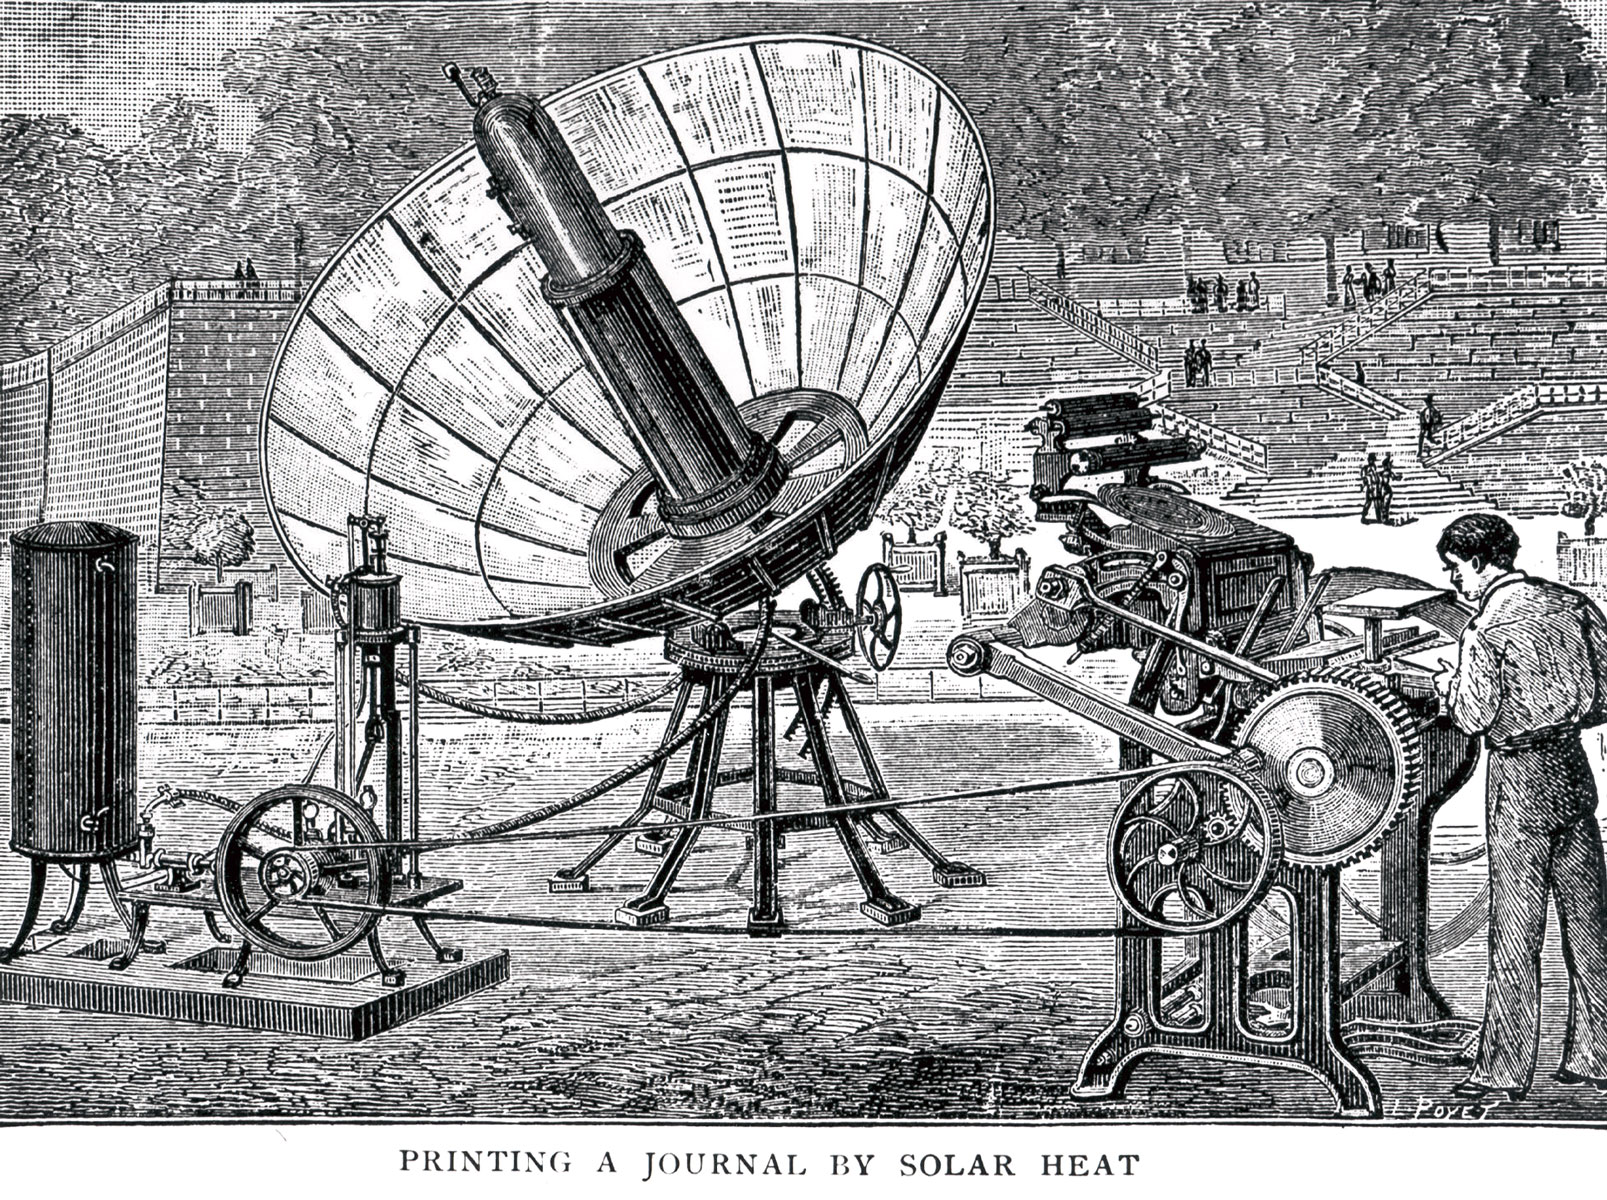 Abel Pifre and his solar powered printing press. Image from Scientific American, May 1882.